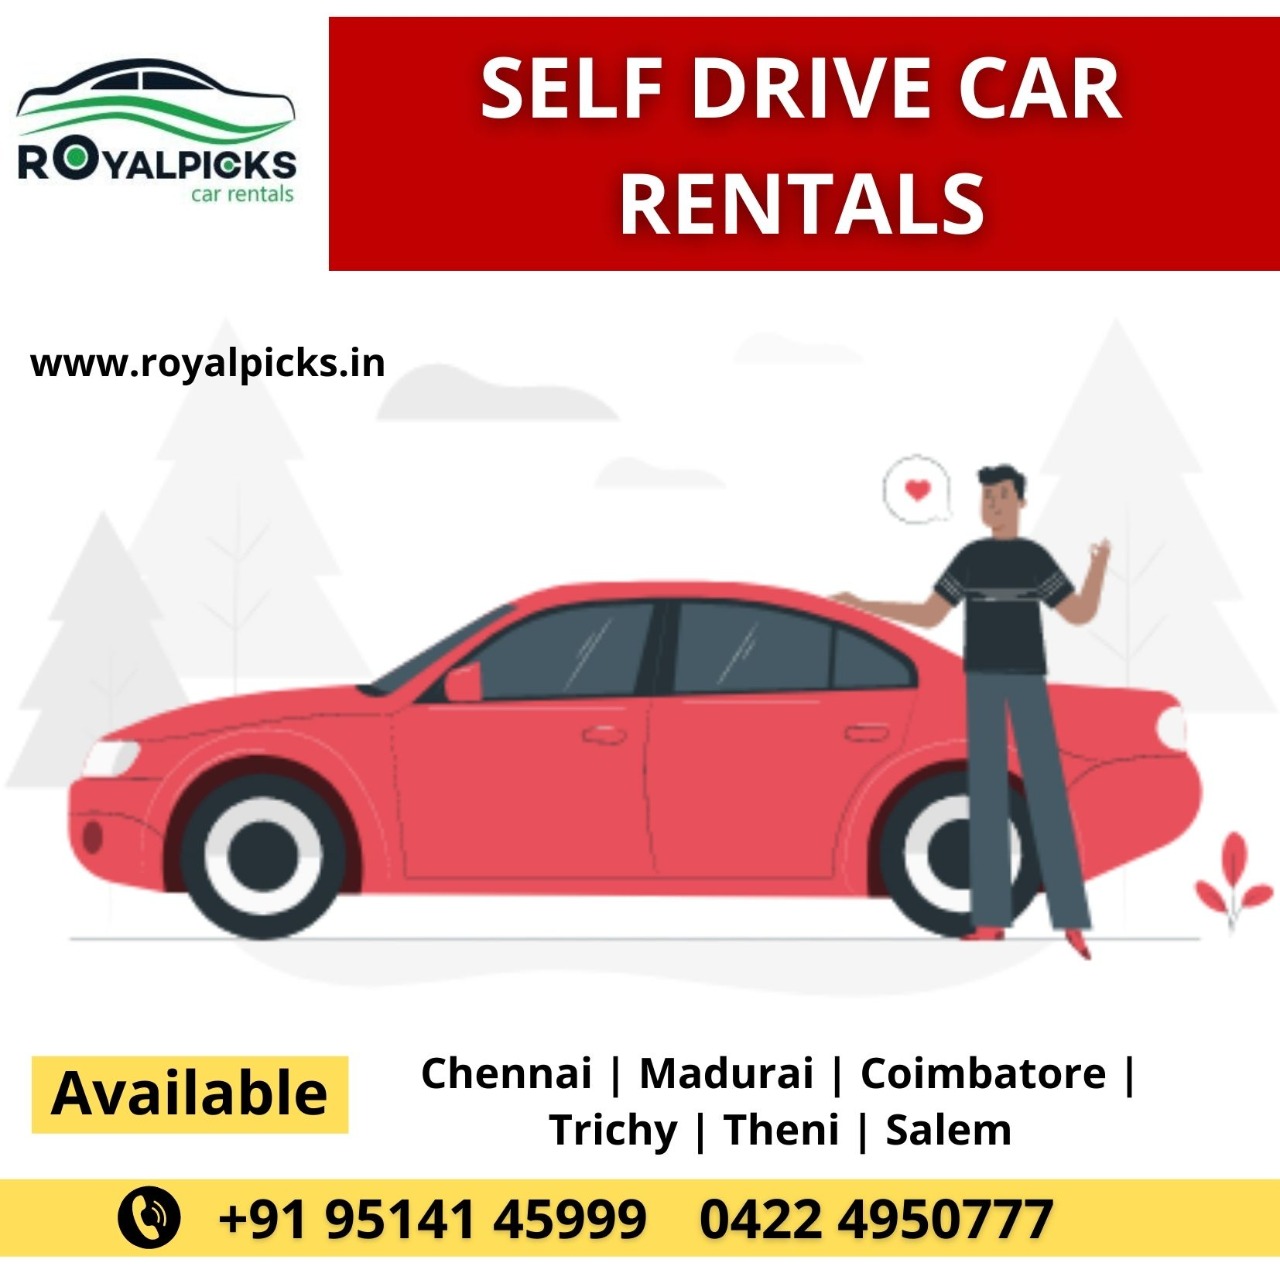 Benefits of Car Rental and Self-drive Cars rental in Chennai